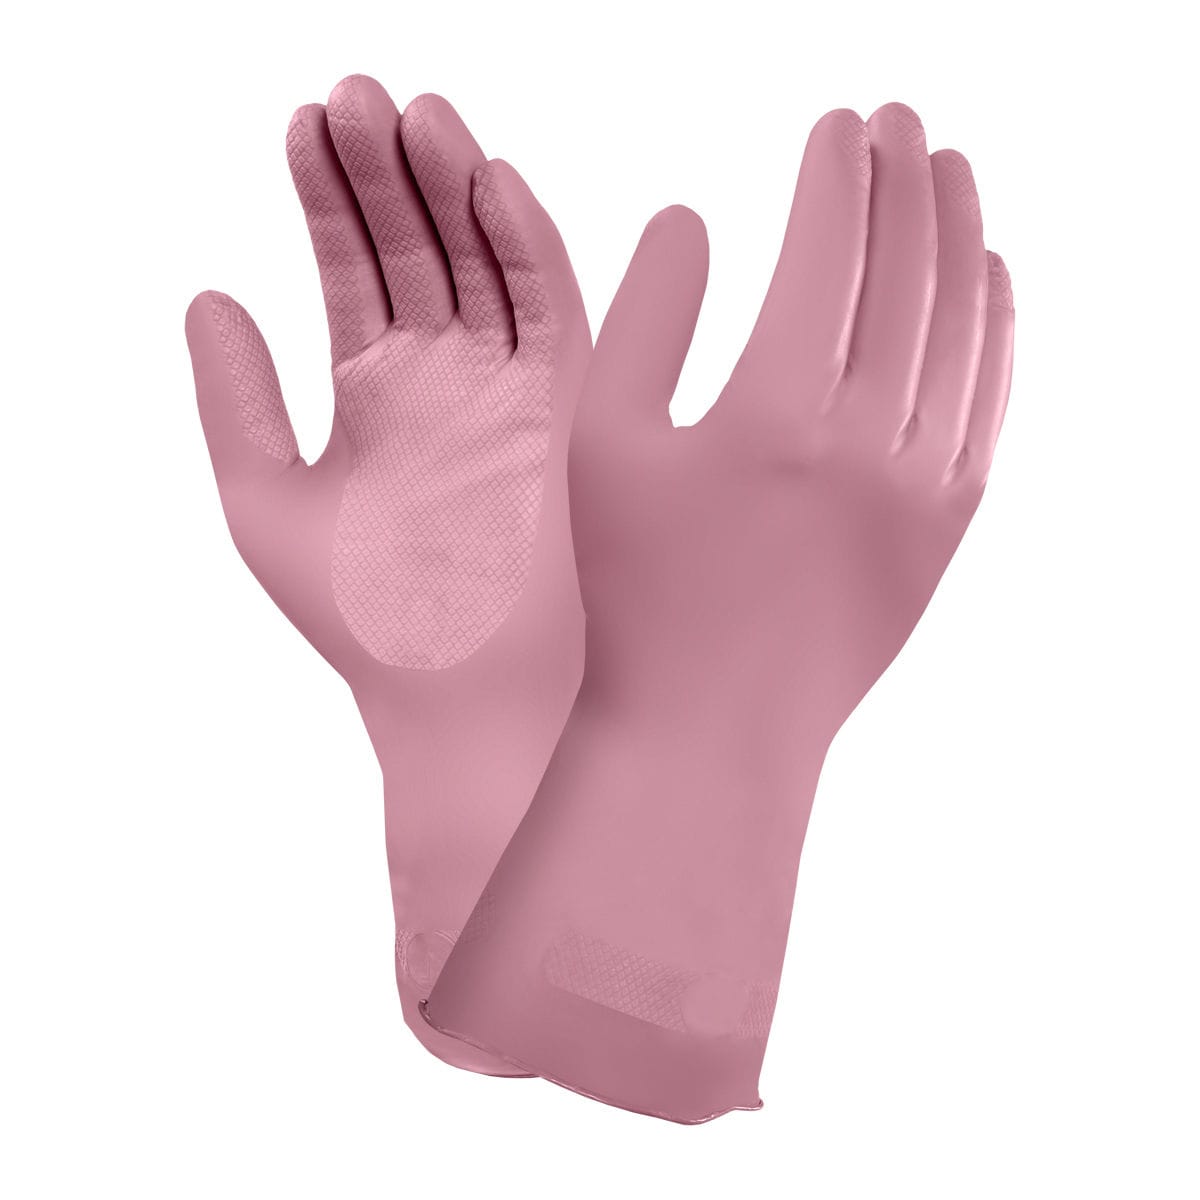 Ansell 87-196 Econohands Plus Latex Gauntlets Pink Size 10 – Pack of 12